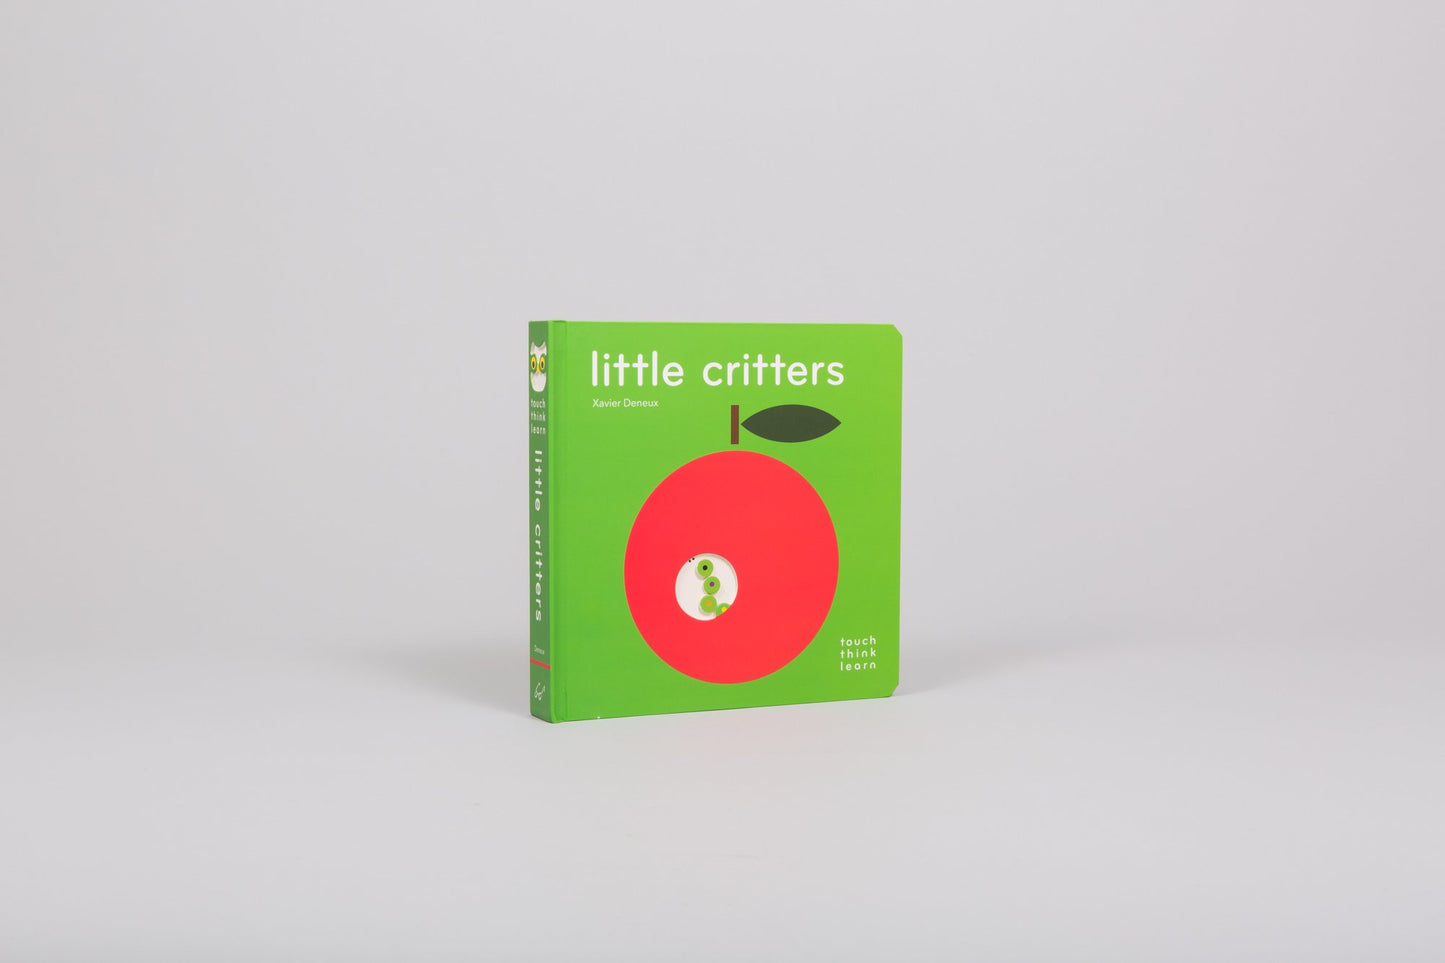 Touch Think Learn: Little Critters